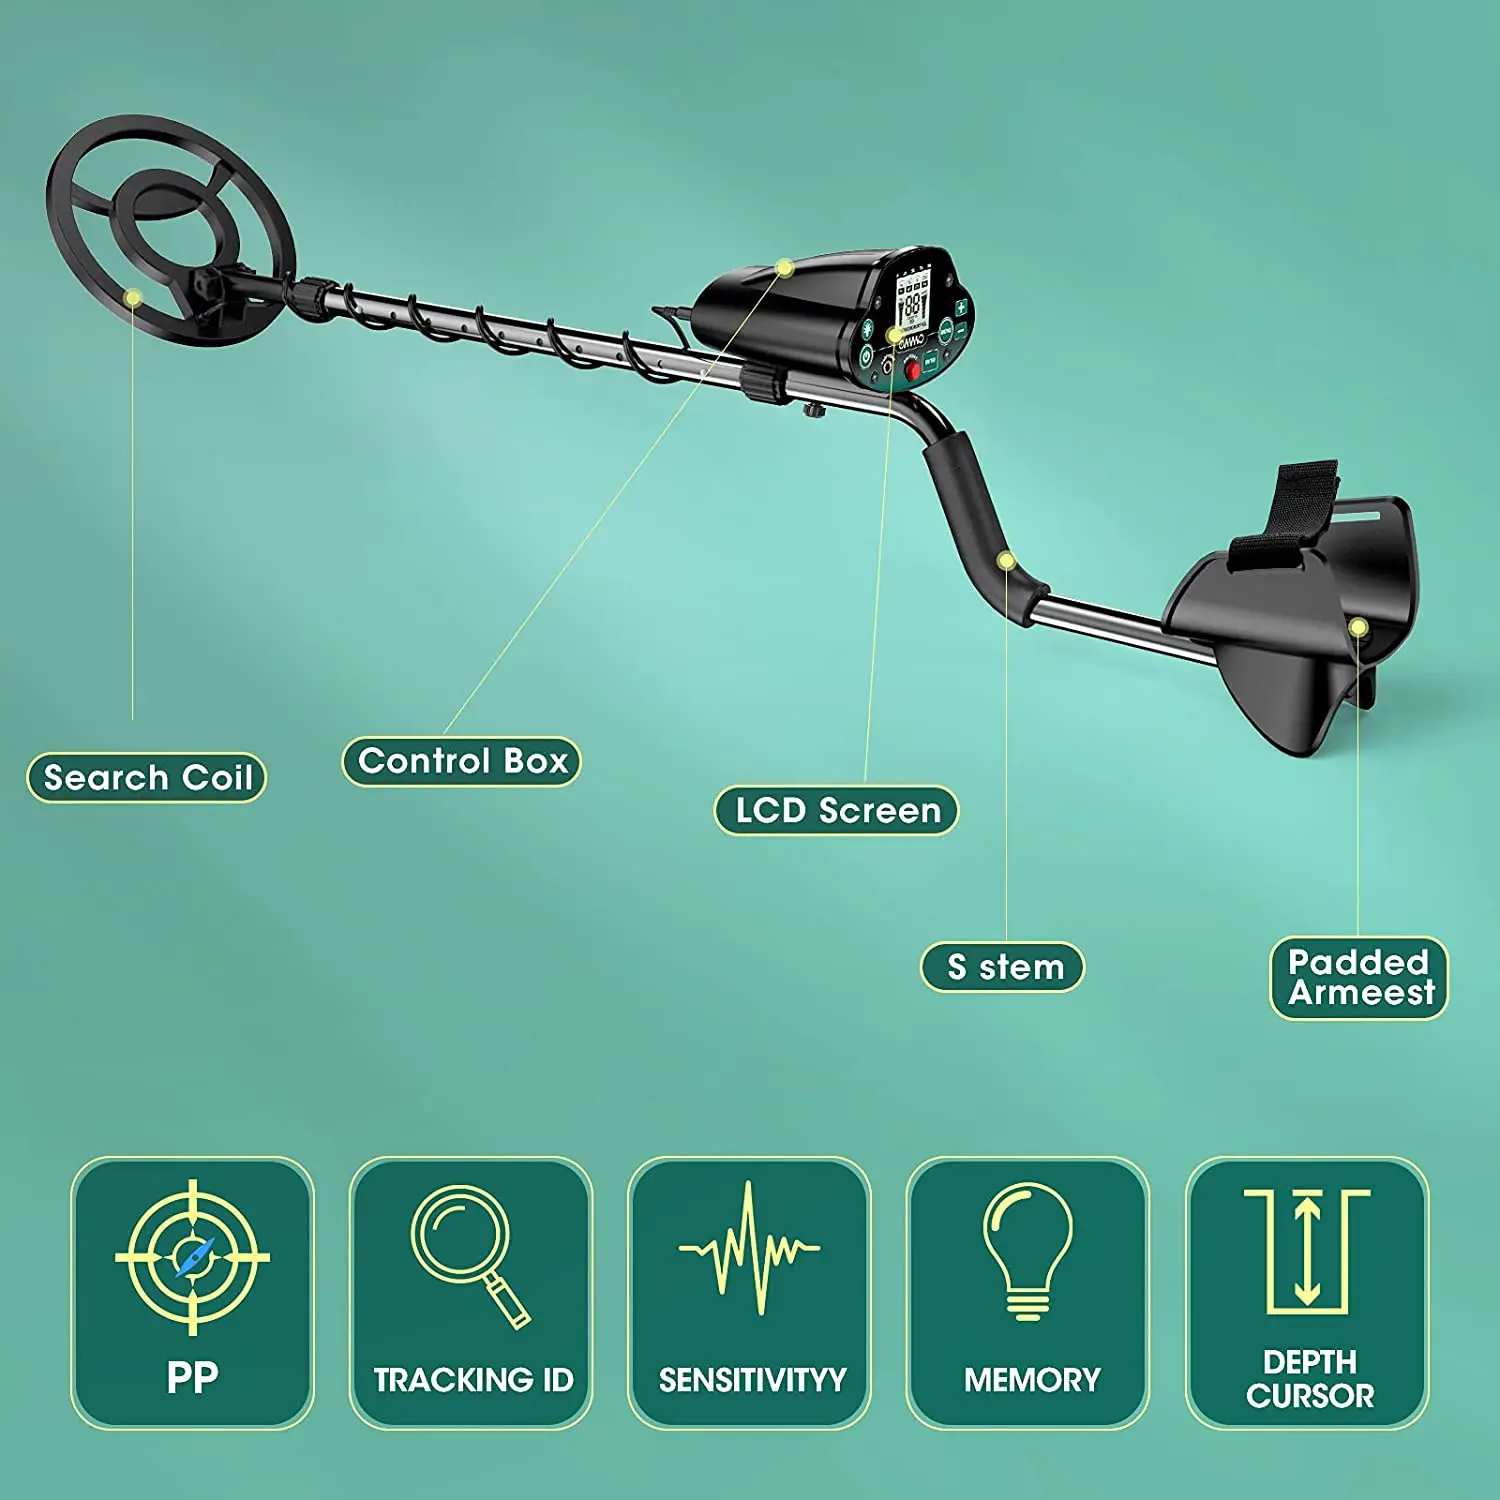 MD-5030P Gold detector and Professional metal detector detector de metales  profesional